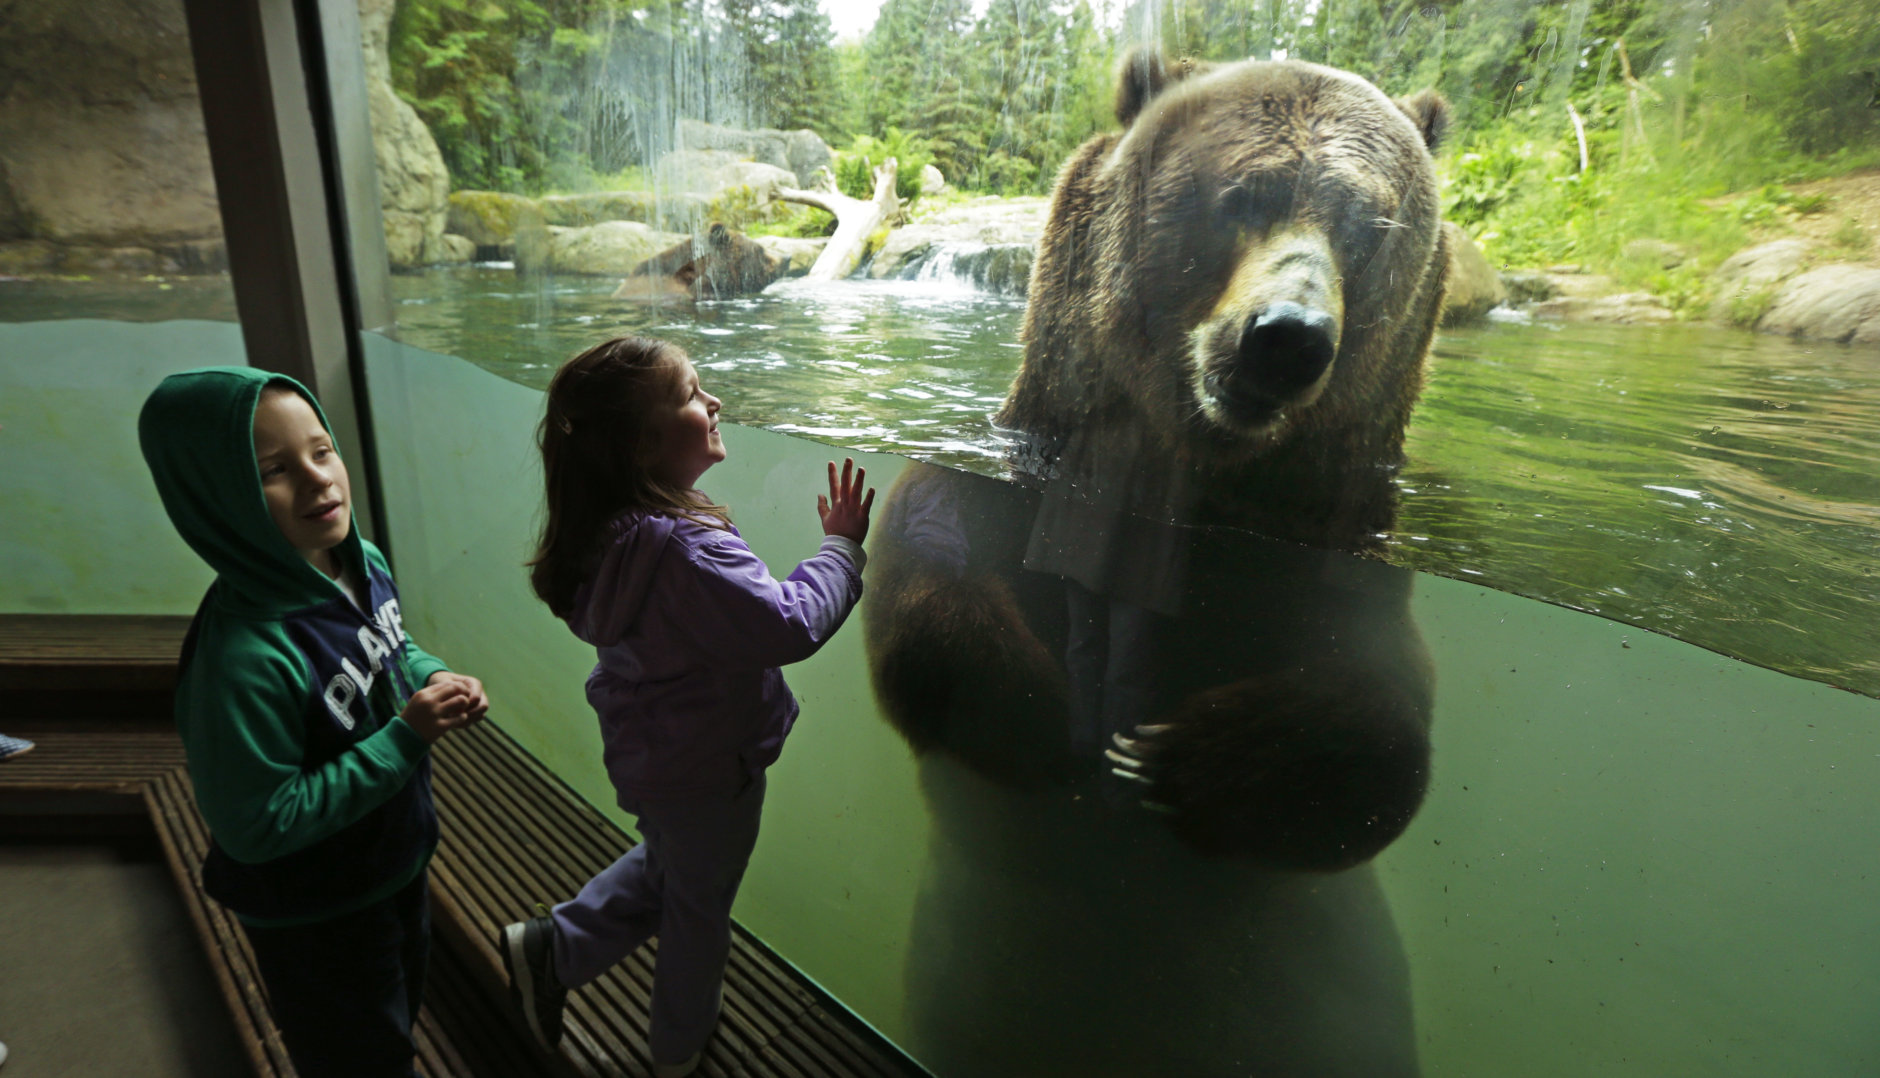 Young visitors get an up-close look at one of two grizzly bears at the Woodland Park Zoo, as he takes a swim, Thursday, June 2, 2016, in Seattle. Saturday will be the zoo's Bear Affair conservation day and Washington Gov. Jay Inslee has designated June 4-12 as Washington state's Bear Awareness Week. (AP Photo/Ted S. Warren)